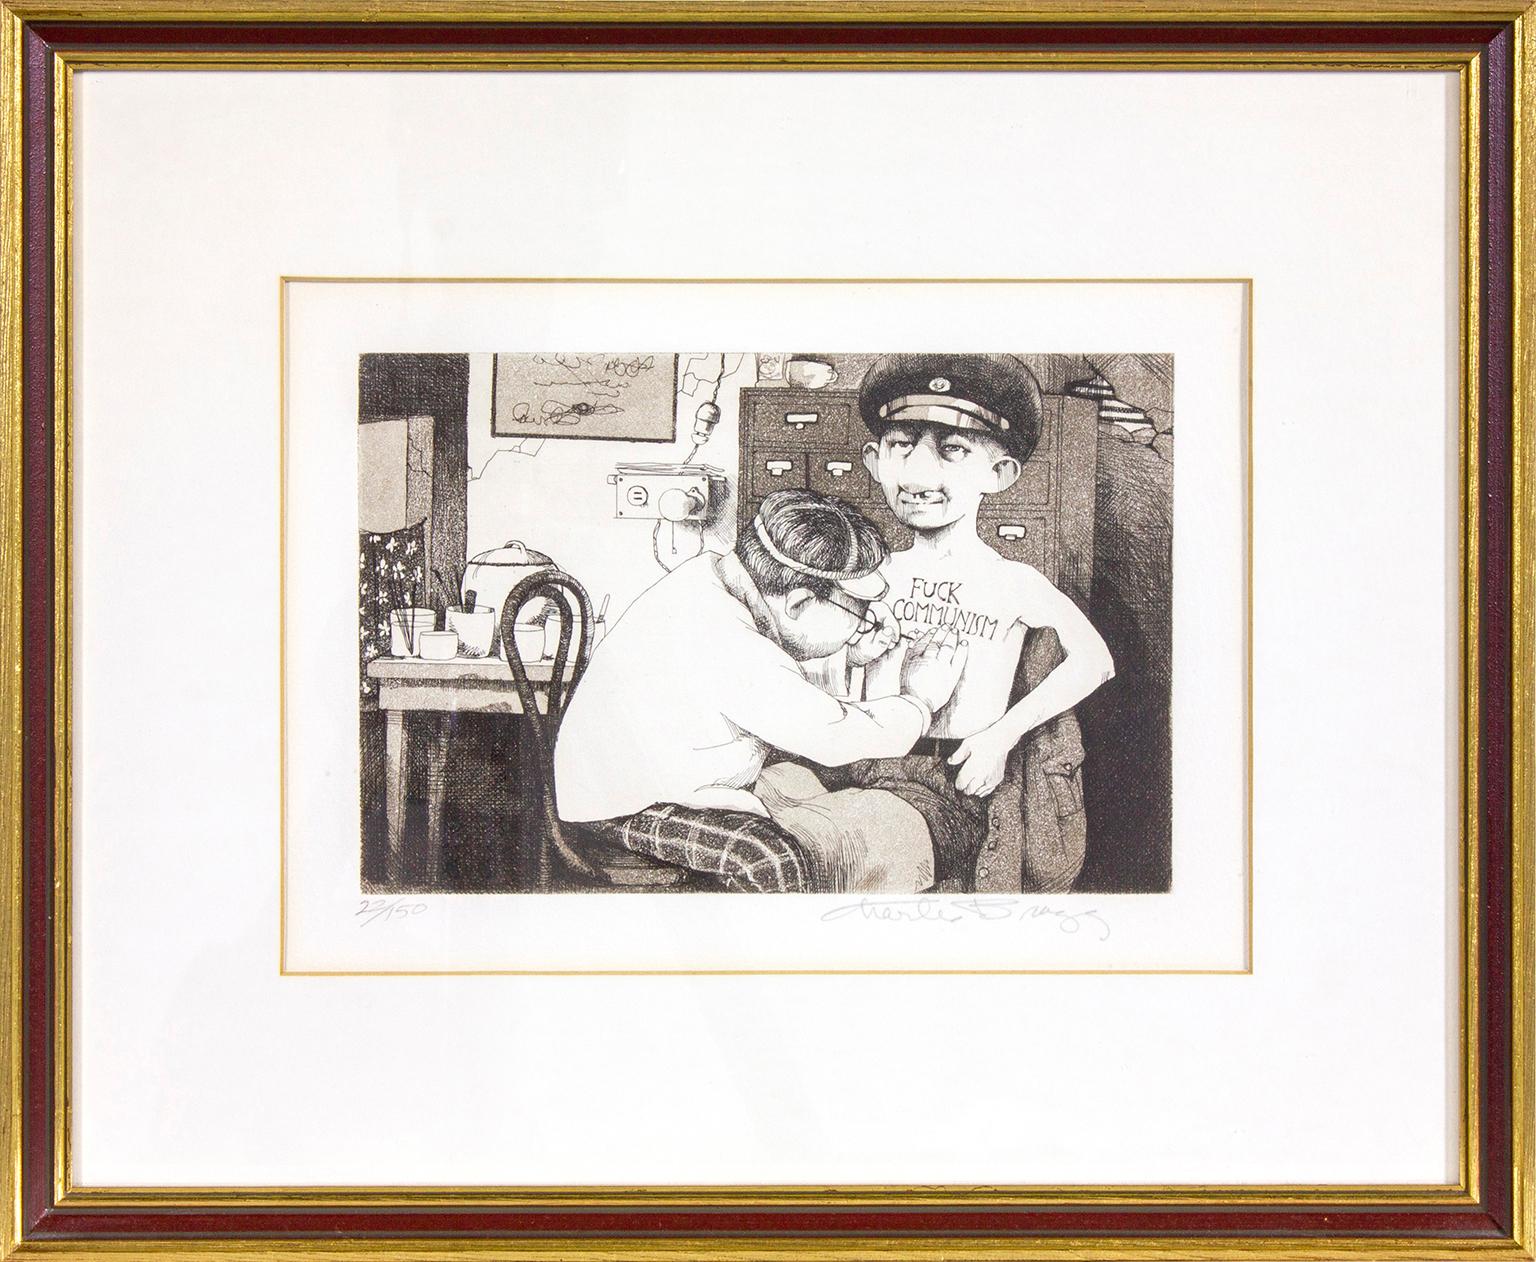  Limited edition etching hand-signed Charles Bragg and hand-numbered 22/150. Depicts a man tattooing "Fuck Communism" on the chest of a soldier.